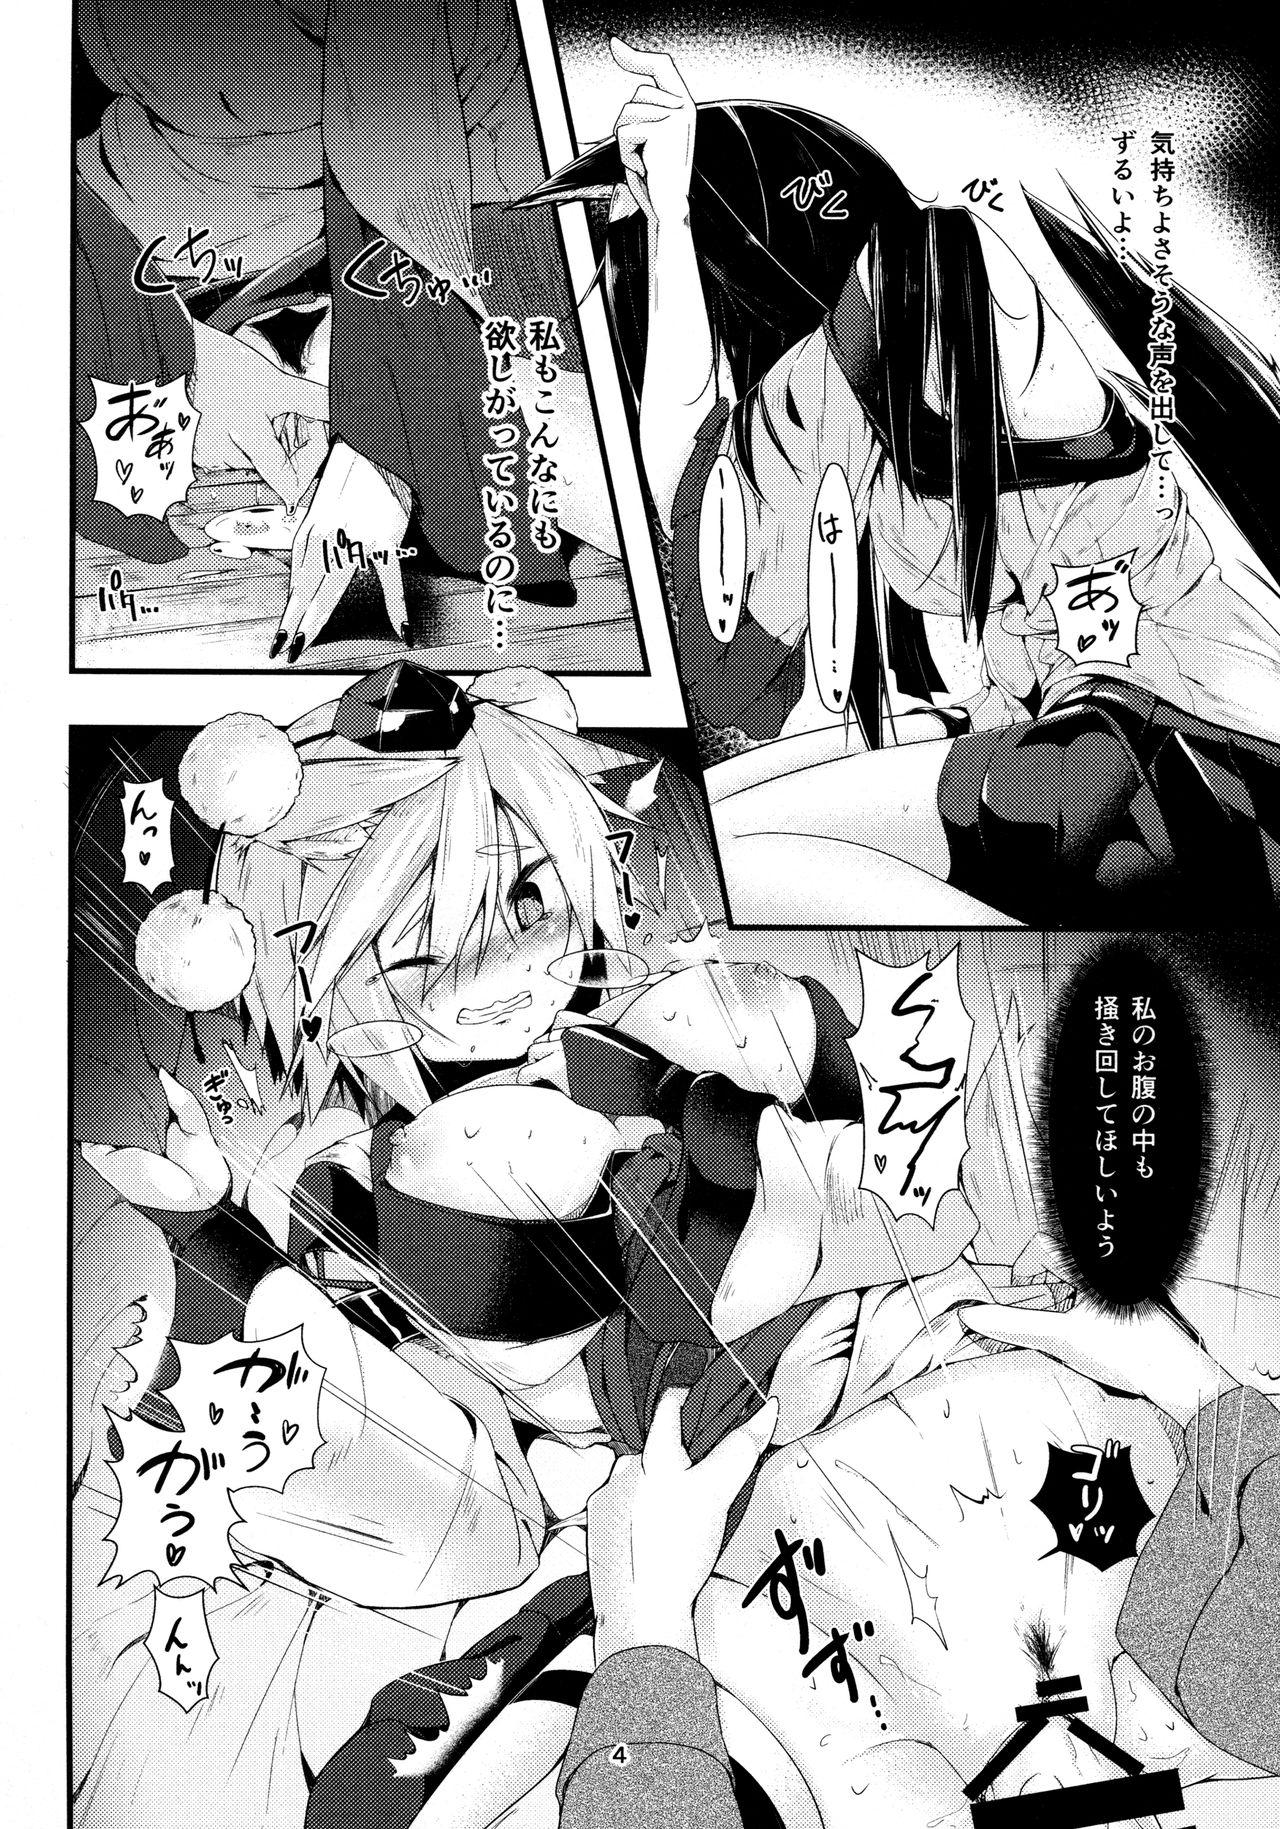 Missionary Position Porn Inu no Onee-chan no Hatsujou Nihikime - Touhou project Oral Sex - Page 3